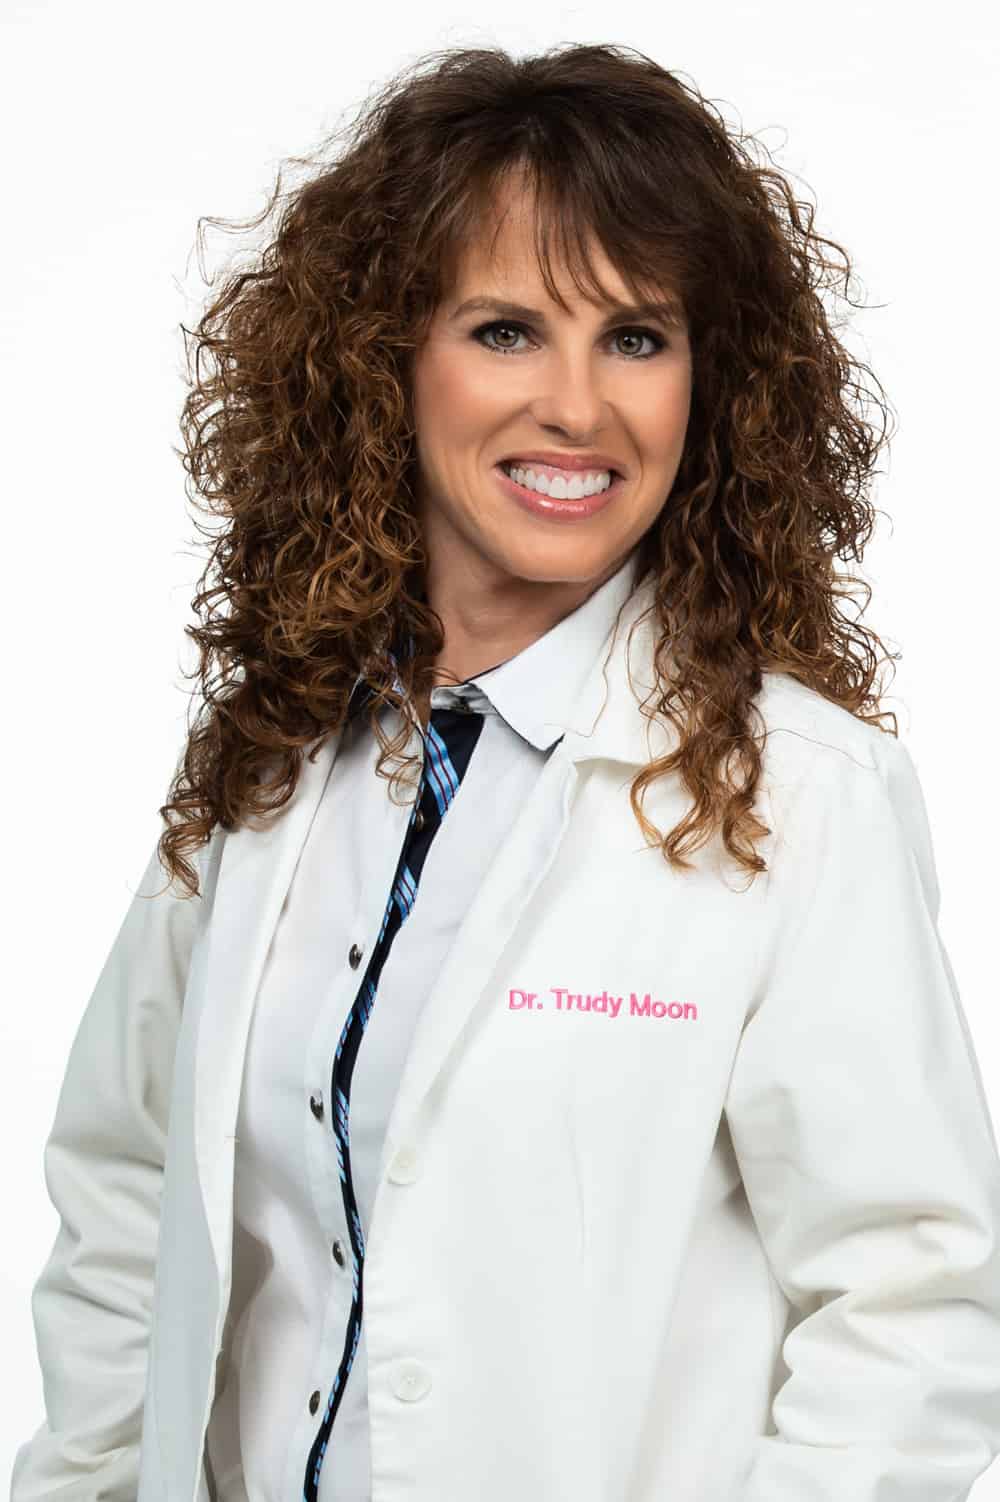 Dr. Trudy Moon